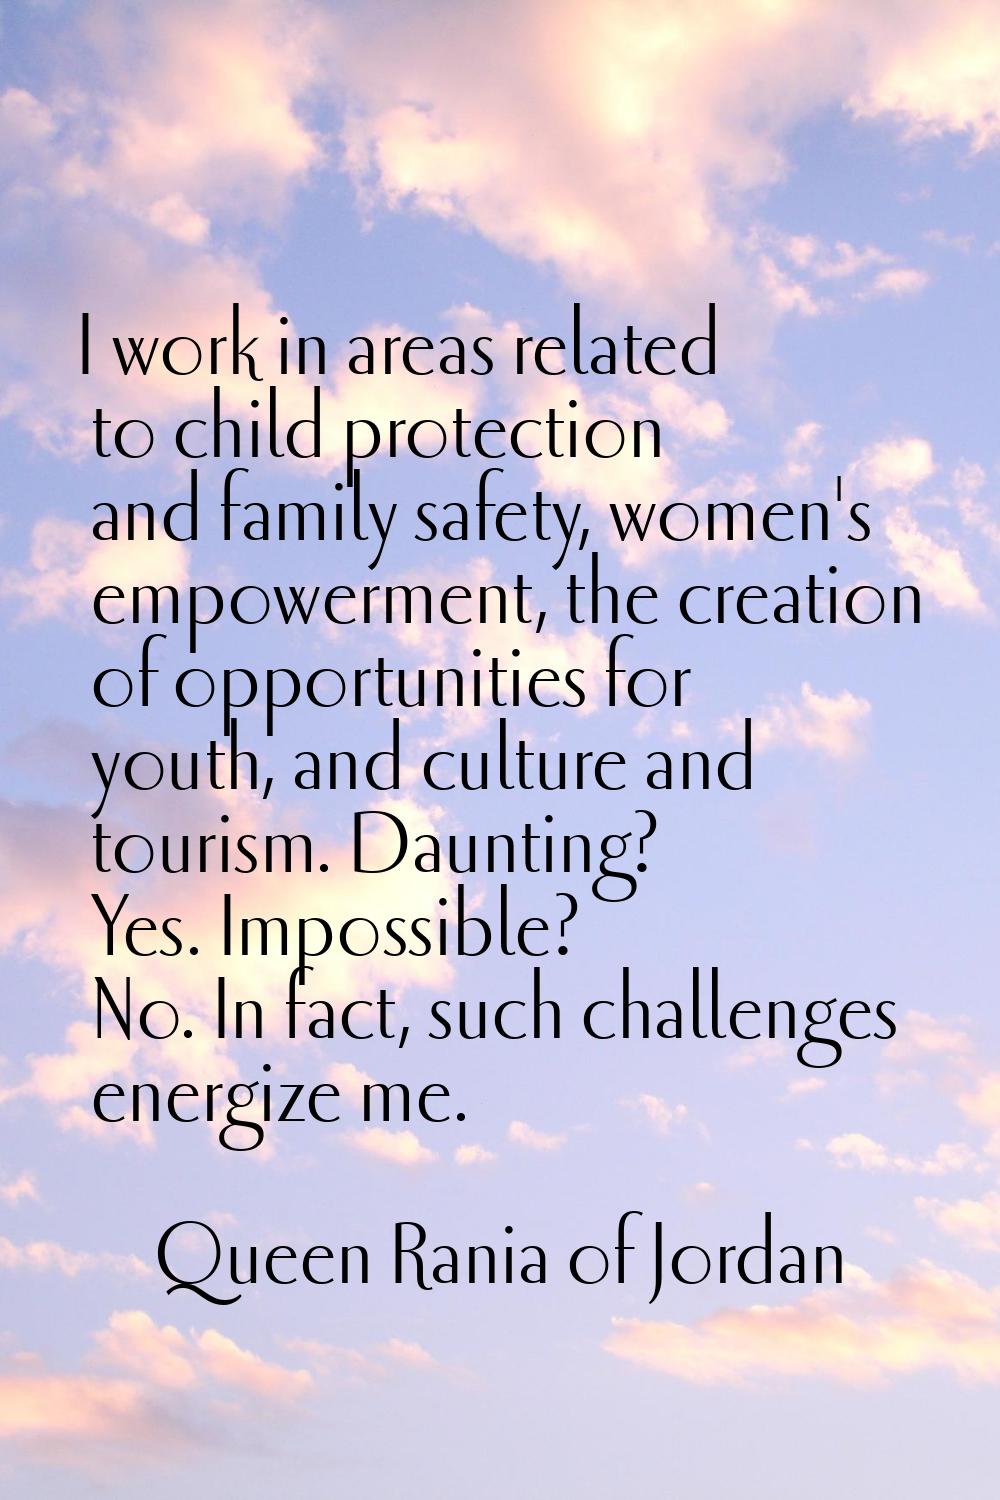 I work in areas related to child protection and family safety, women's empowerment, the creation of